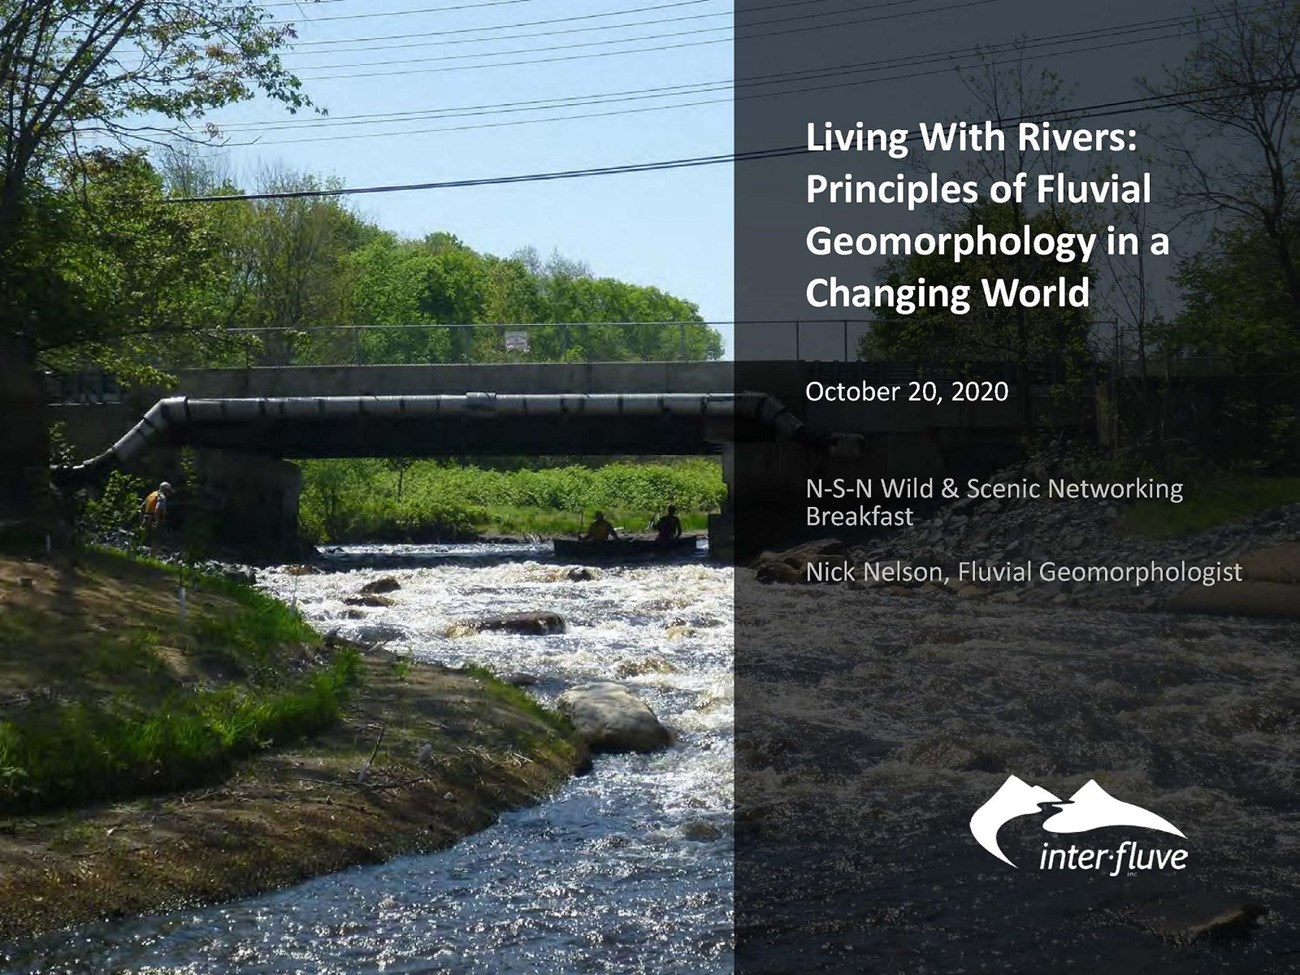 The Networking Gathering in October 2020 was Living With Rivers: Principles of Fluvial Geomorphology in a Changing World, a presentation by Nick Nelson, Fluvial Geomorphologist at Inter-Fluve Inc.  Image provided by Nashua, Squannacook, and Nissitissit Ri